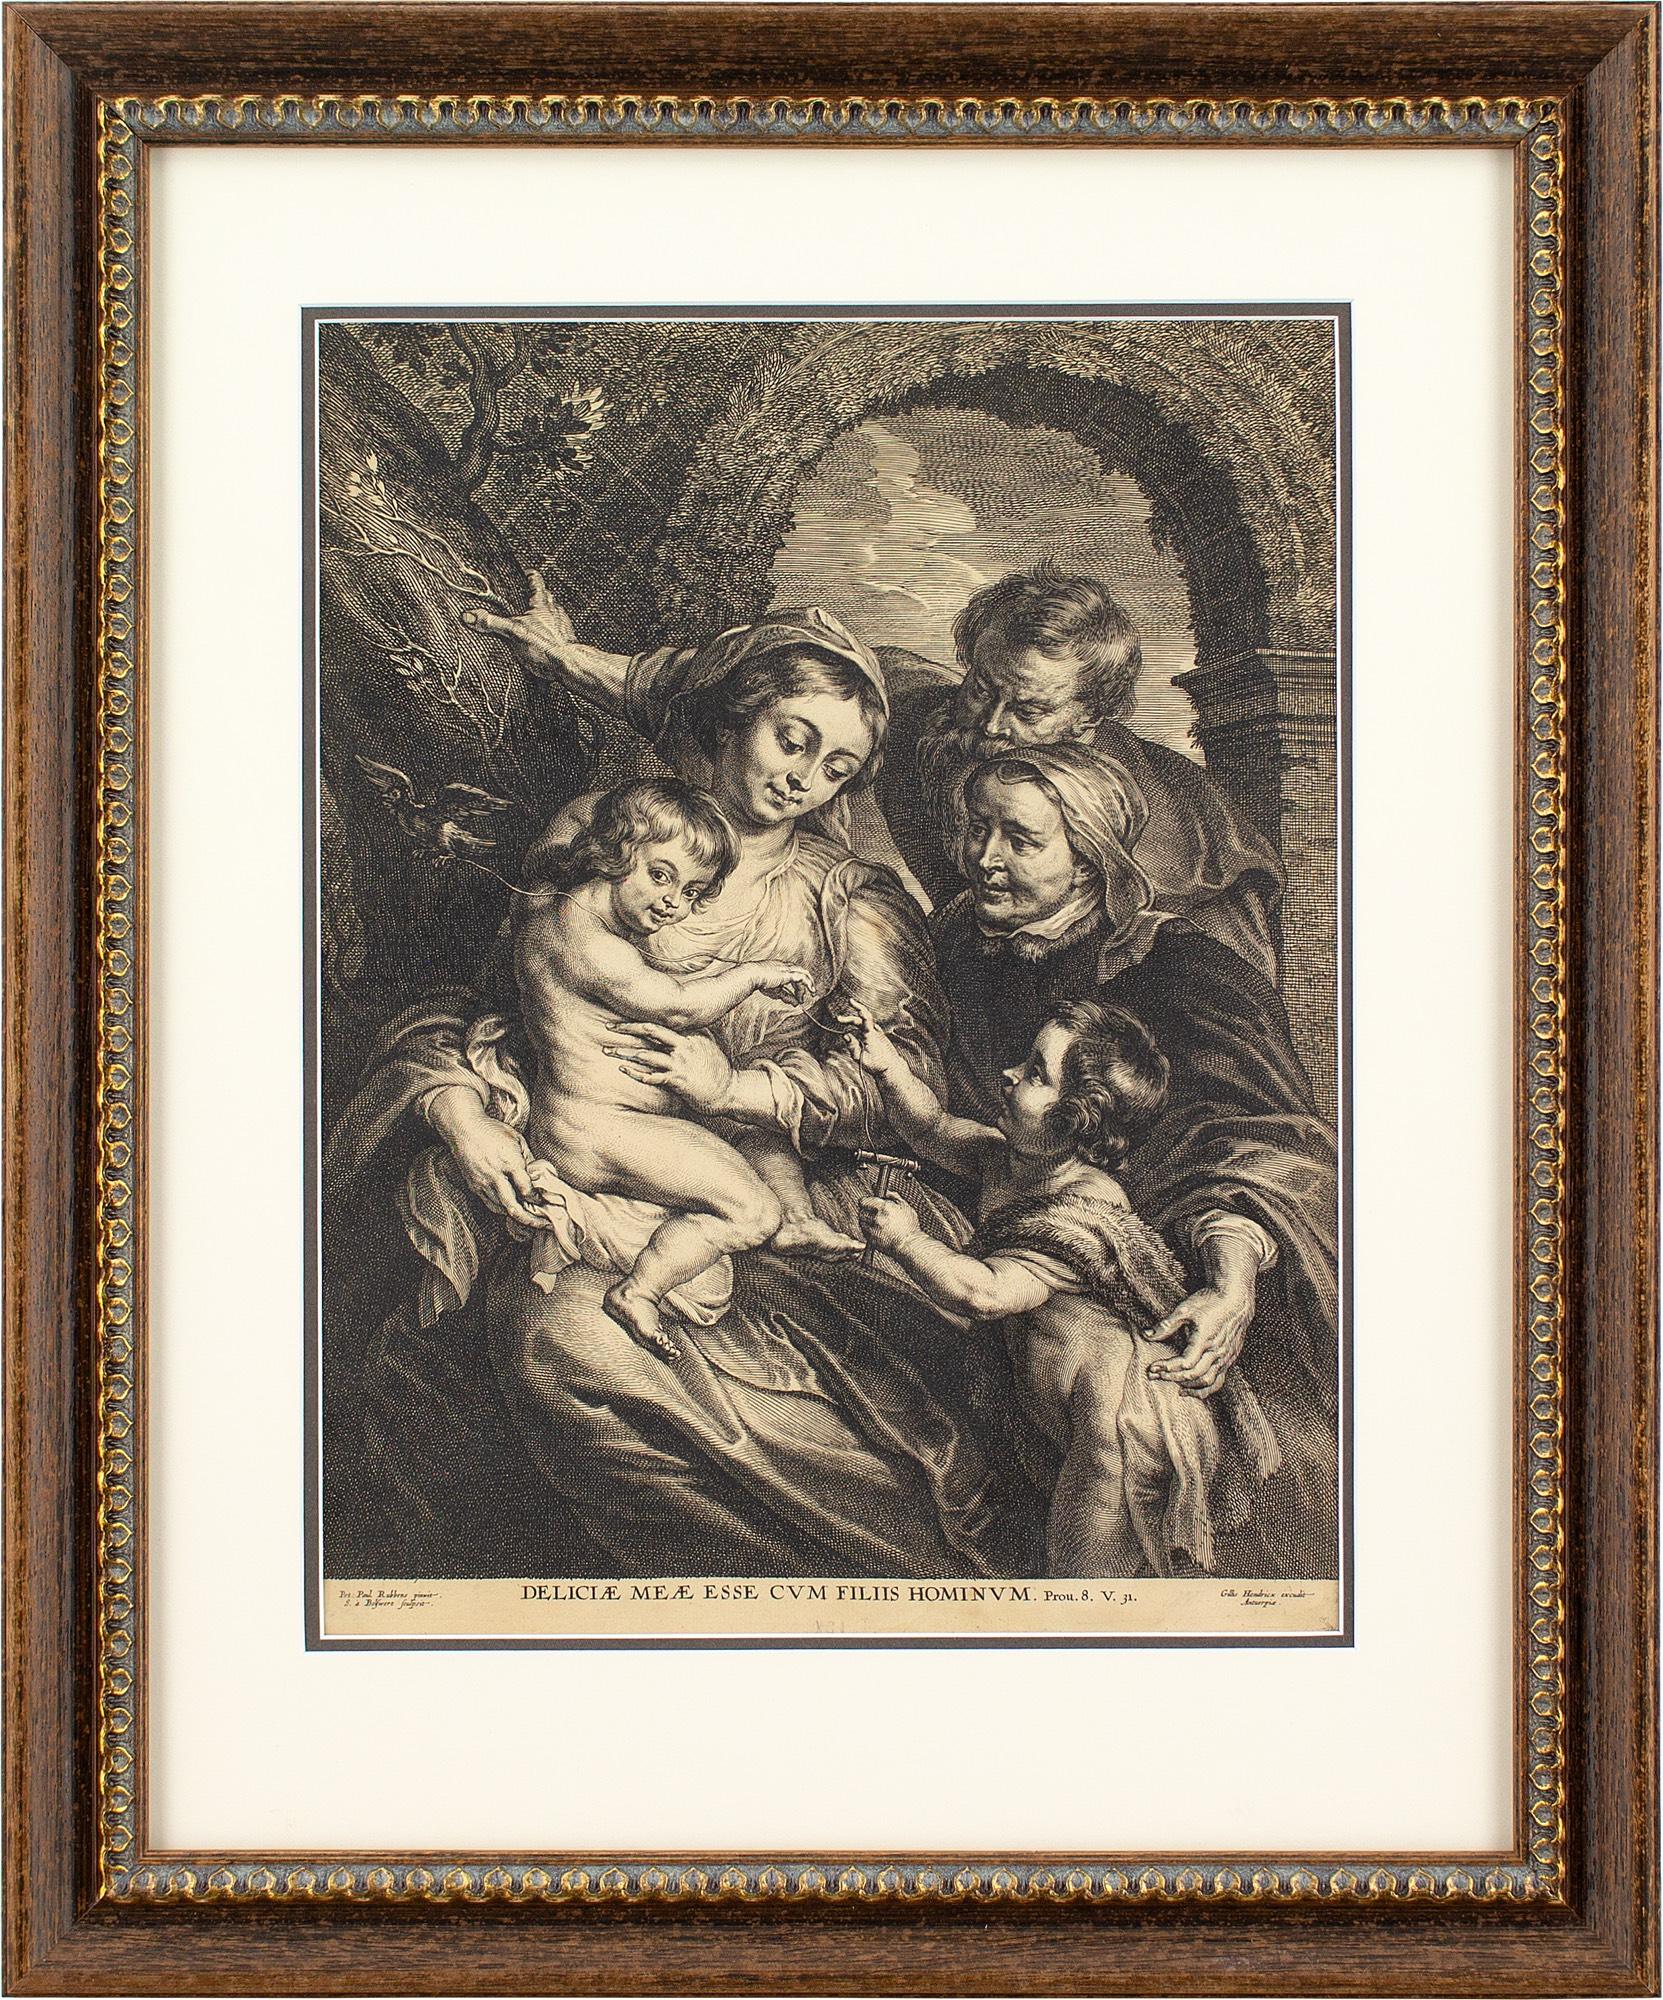 This early 17th-century engraving by Schelte Adams à Bolswert (1586-1659) is after a painting by Peter Paul Rubens (1577-1640).

It’s remarkable that Bolswert produced this engraving during Rubens’ lifetime. It’s around 400 years old. He